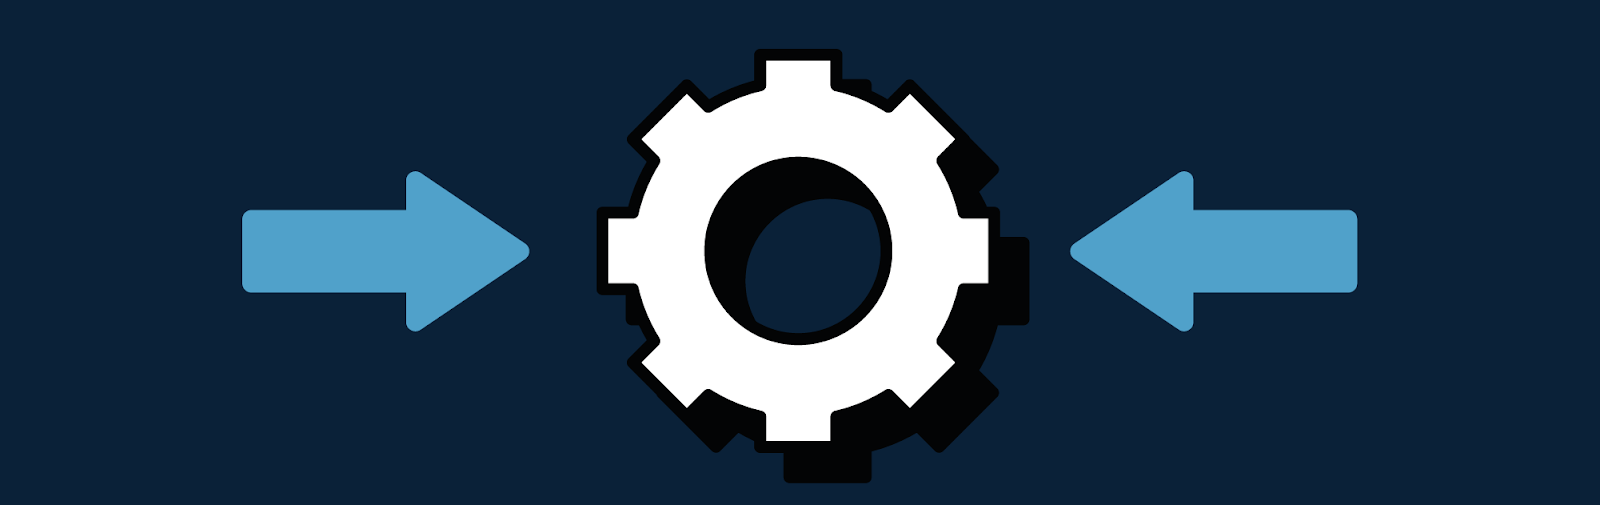 icon of a gear with arrows pushing in on either side